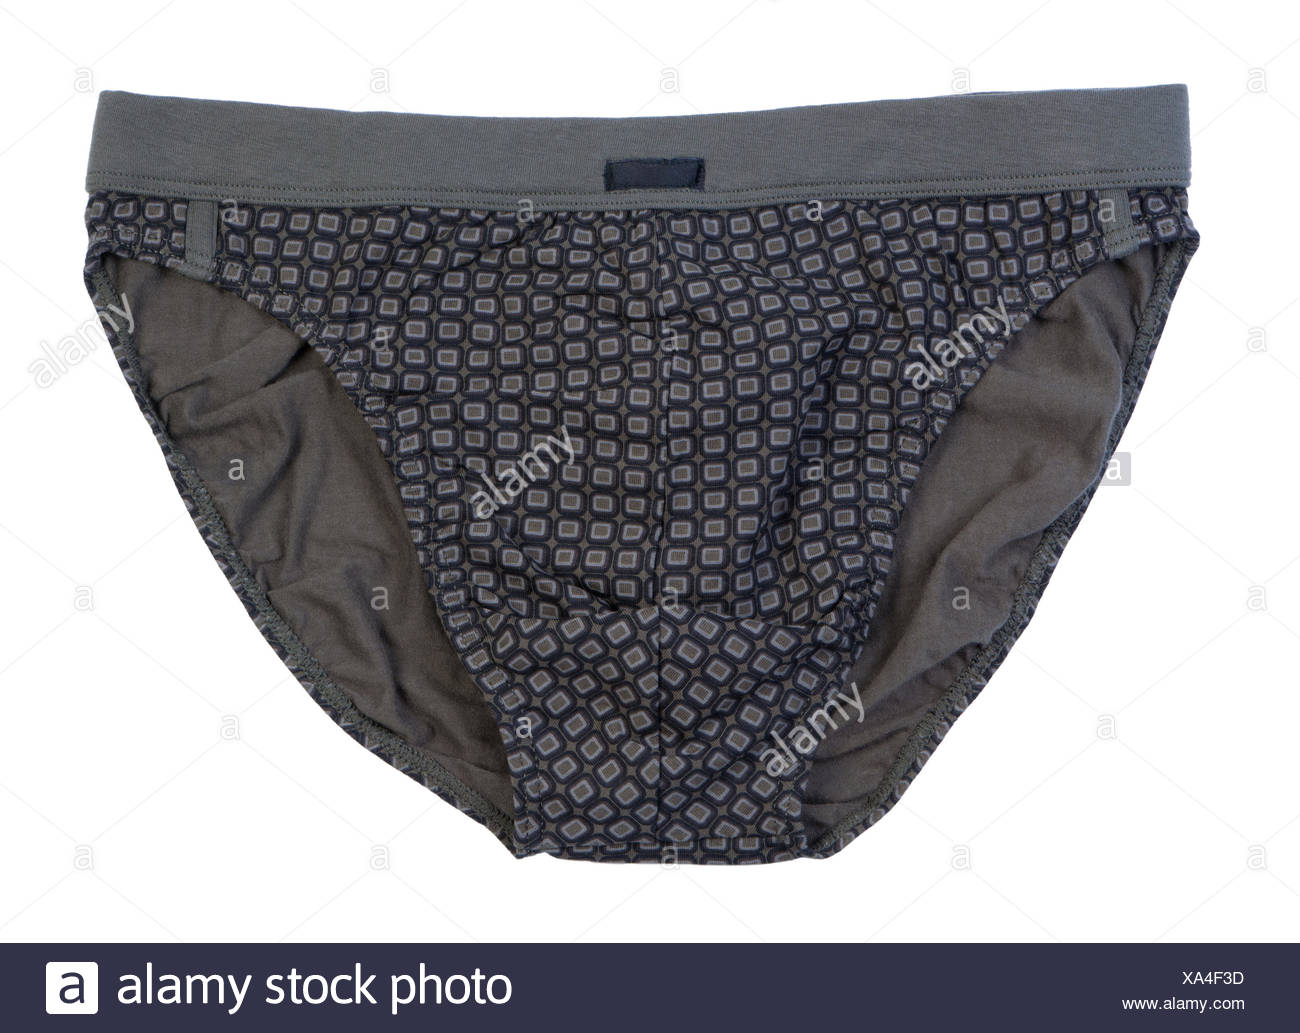 Mens Underpants High Resolution Stock Photography and Images - Alamy